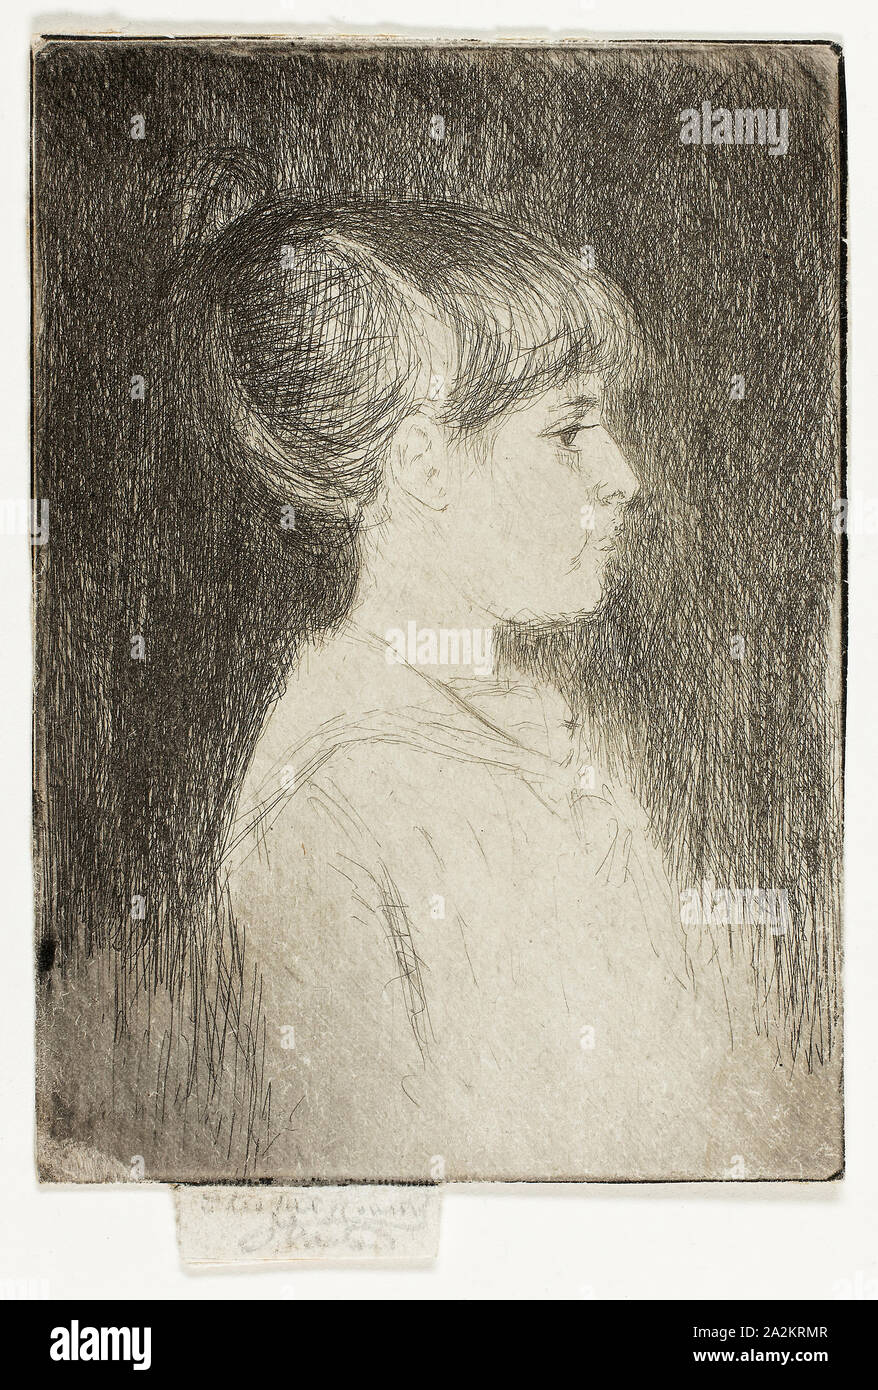 Jeanette, June 1887, 1887, Theodore Roussel, French, worked in England, 1847-1926, England, Etching in black on ivory wove paper, 89 × 63 mm (image/plate), 95 × 63 mm (sheet Stock Photo